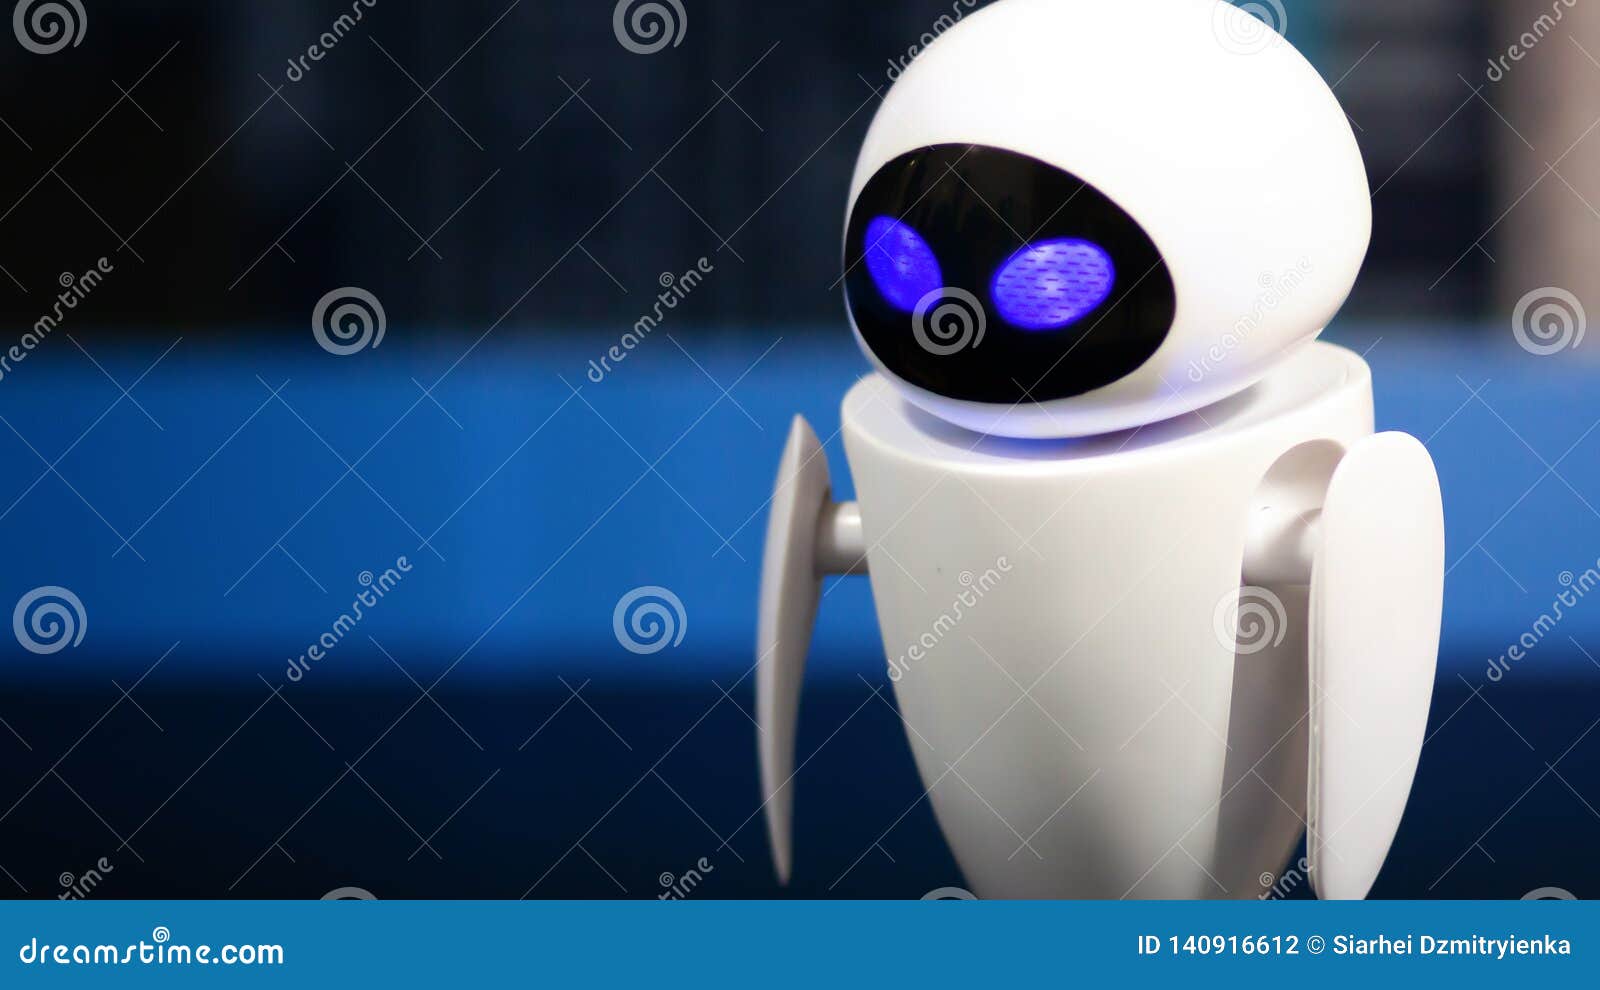 Robot Android Eva Character From Animation Movie Wall E By Disney And Pixar Studio Editorial Photography Image Of Pixar Expo